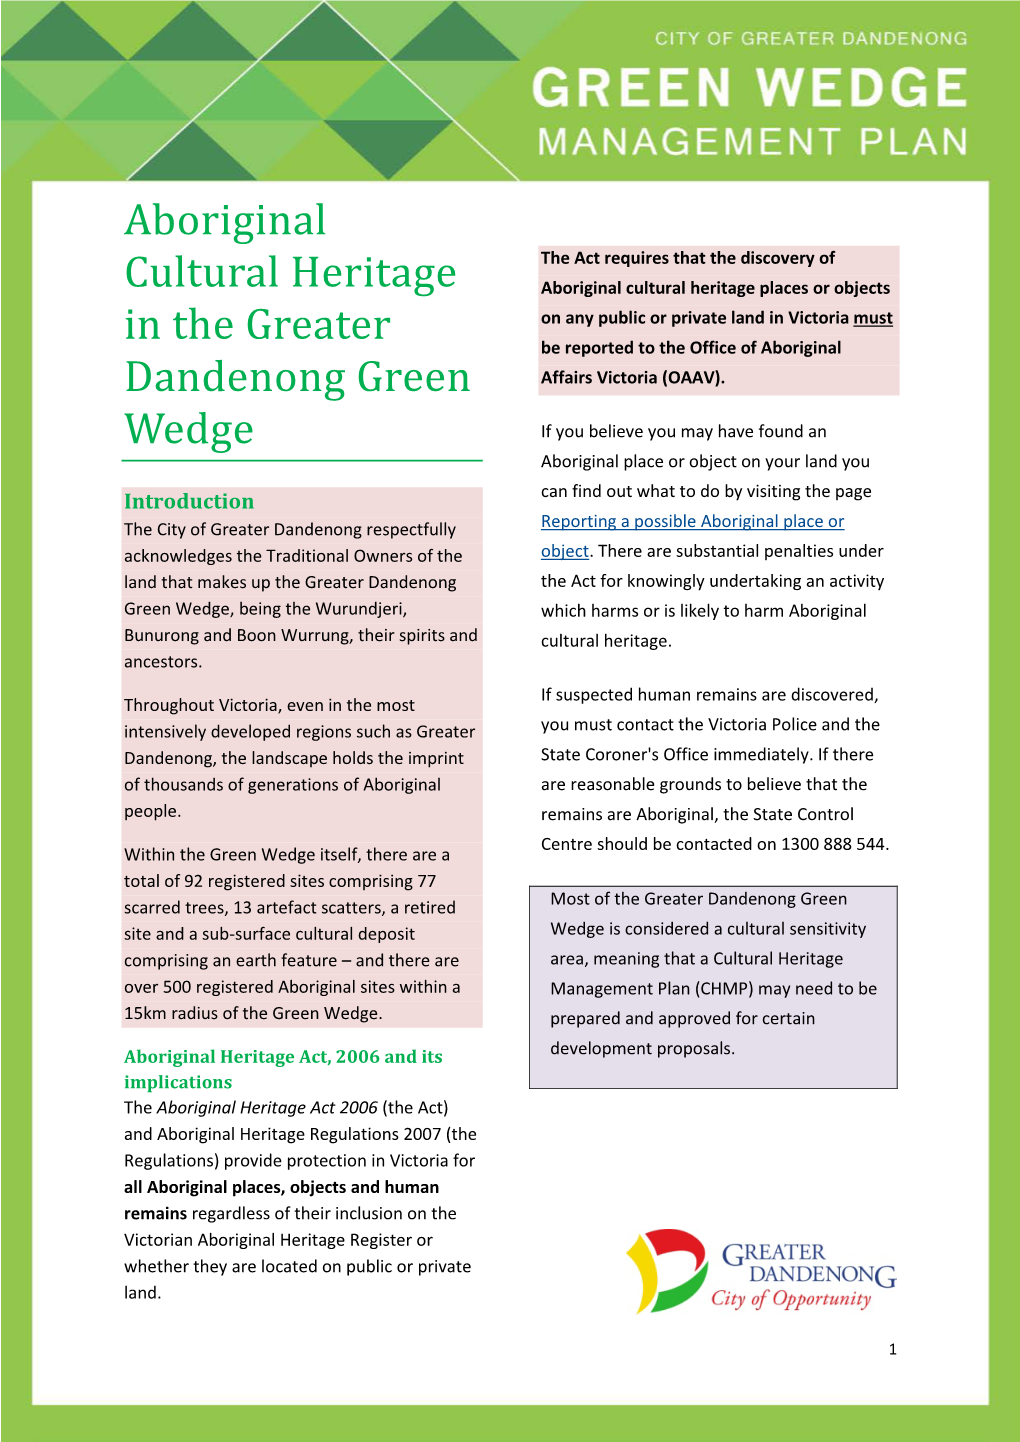 Aboriginal Cultural Heritage in the Greater Dandenong Green Wedge